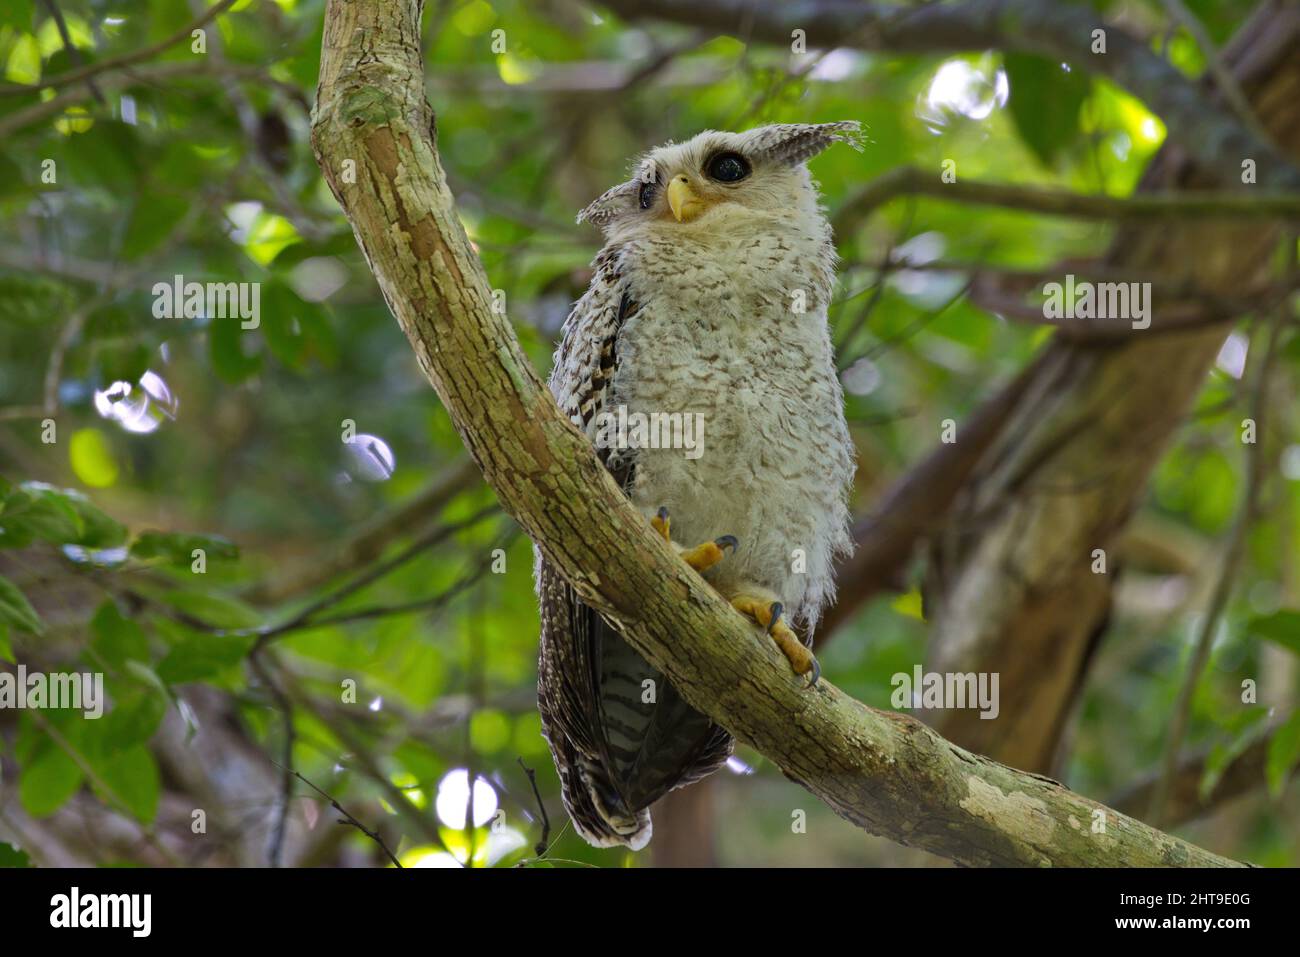 Adult and juvenile Owls birds of prey perched in trees Stock Photo